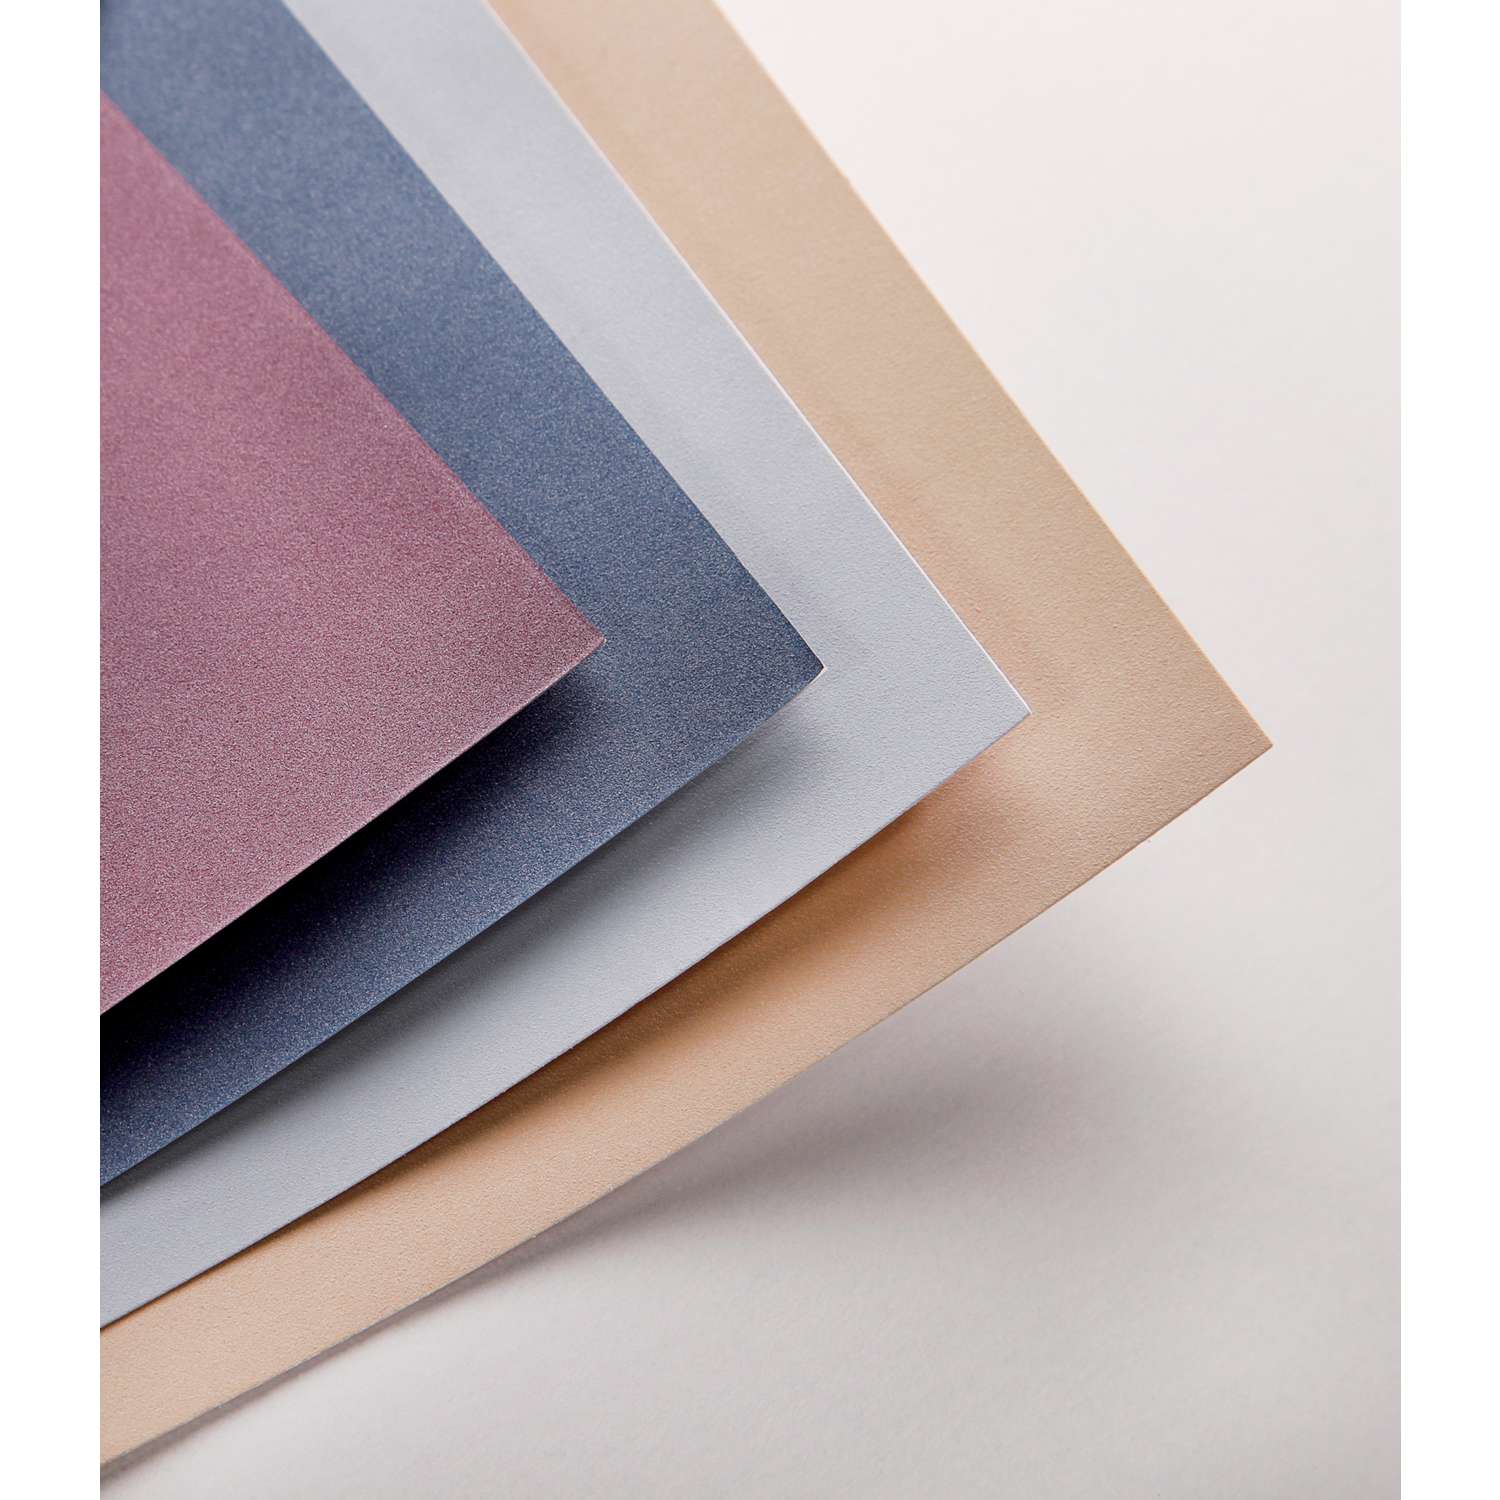 Clairefontaine Pastelmat Pad - Maize, Buttercup, Light Grey, Dark Grey